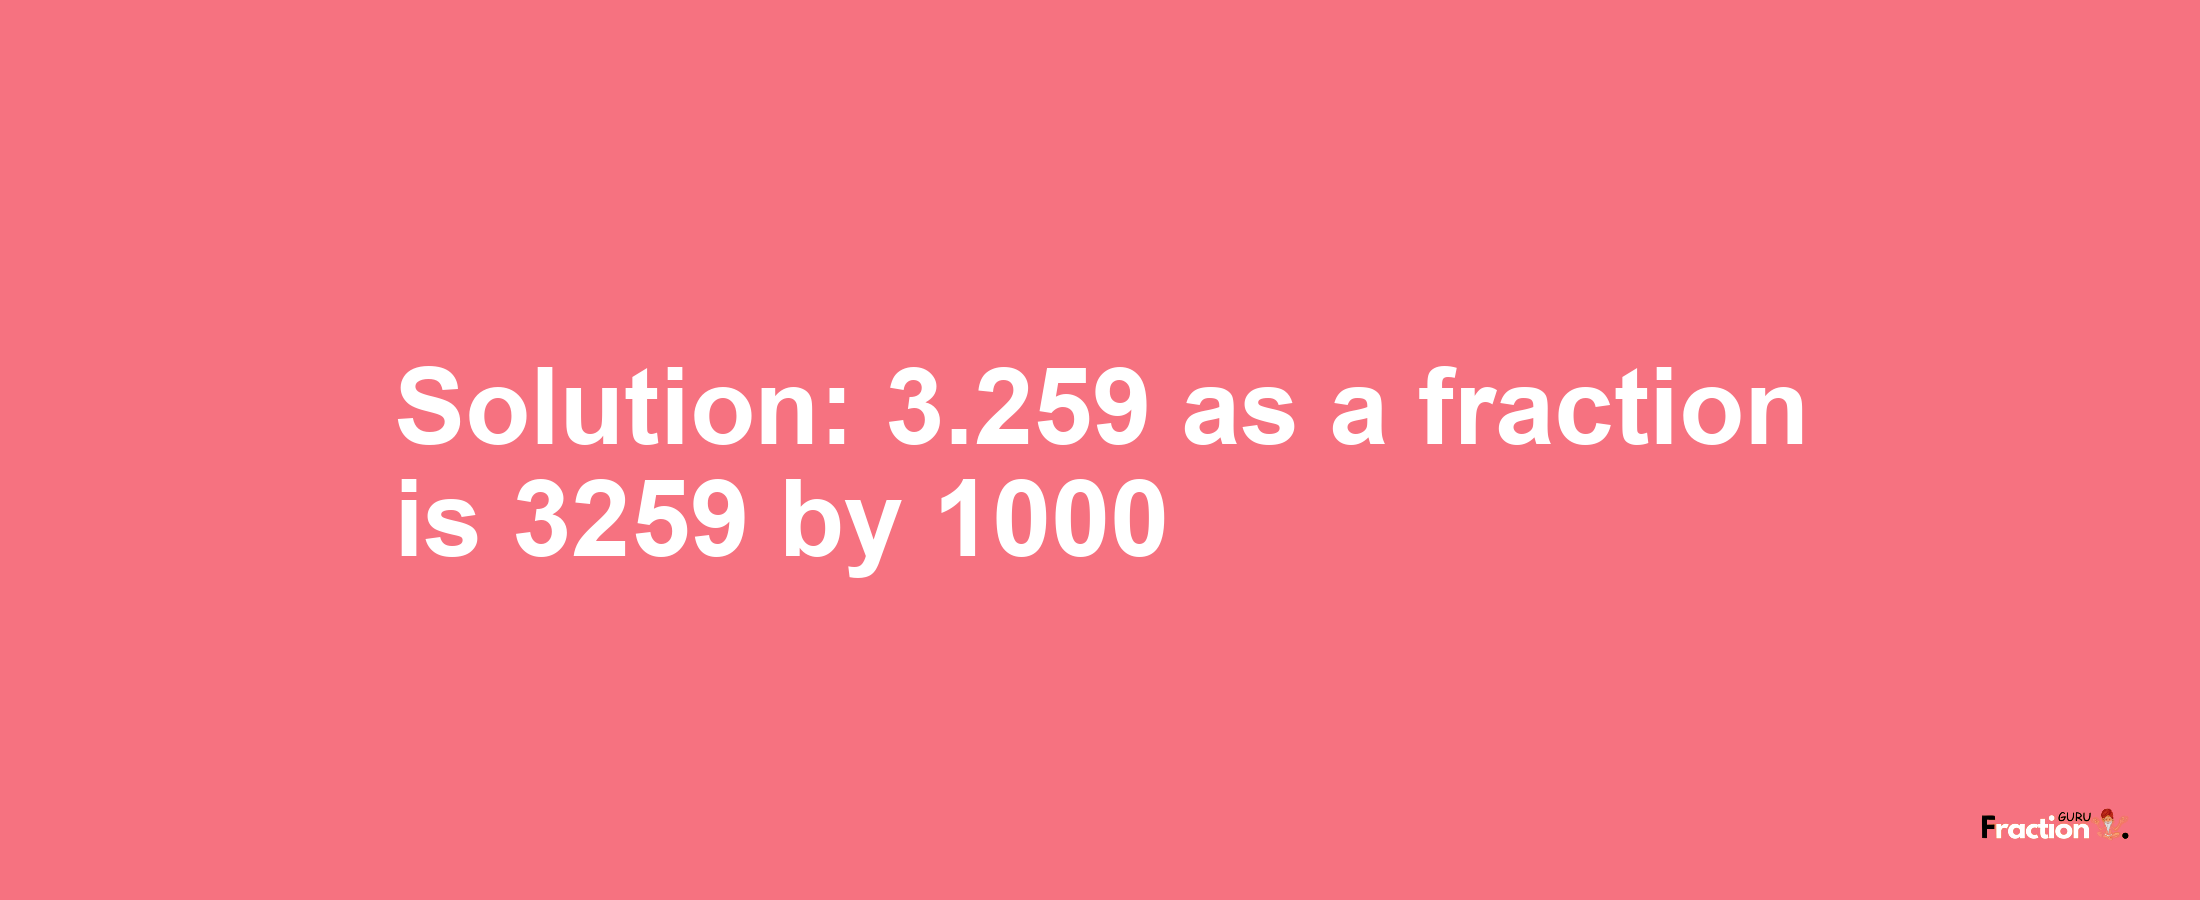 Solution:3.259 as a fraction is 3259/1000